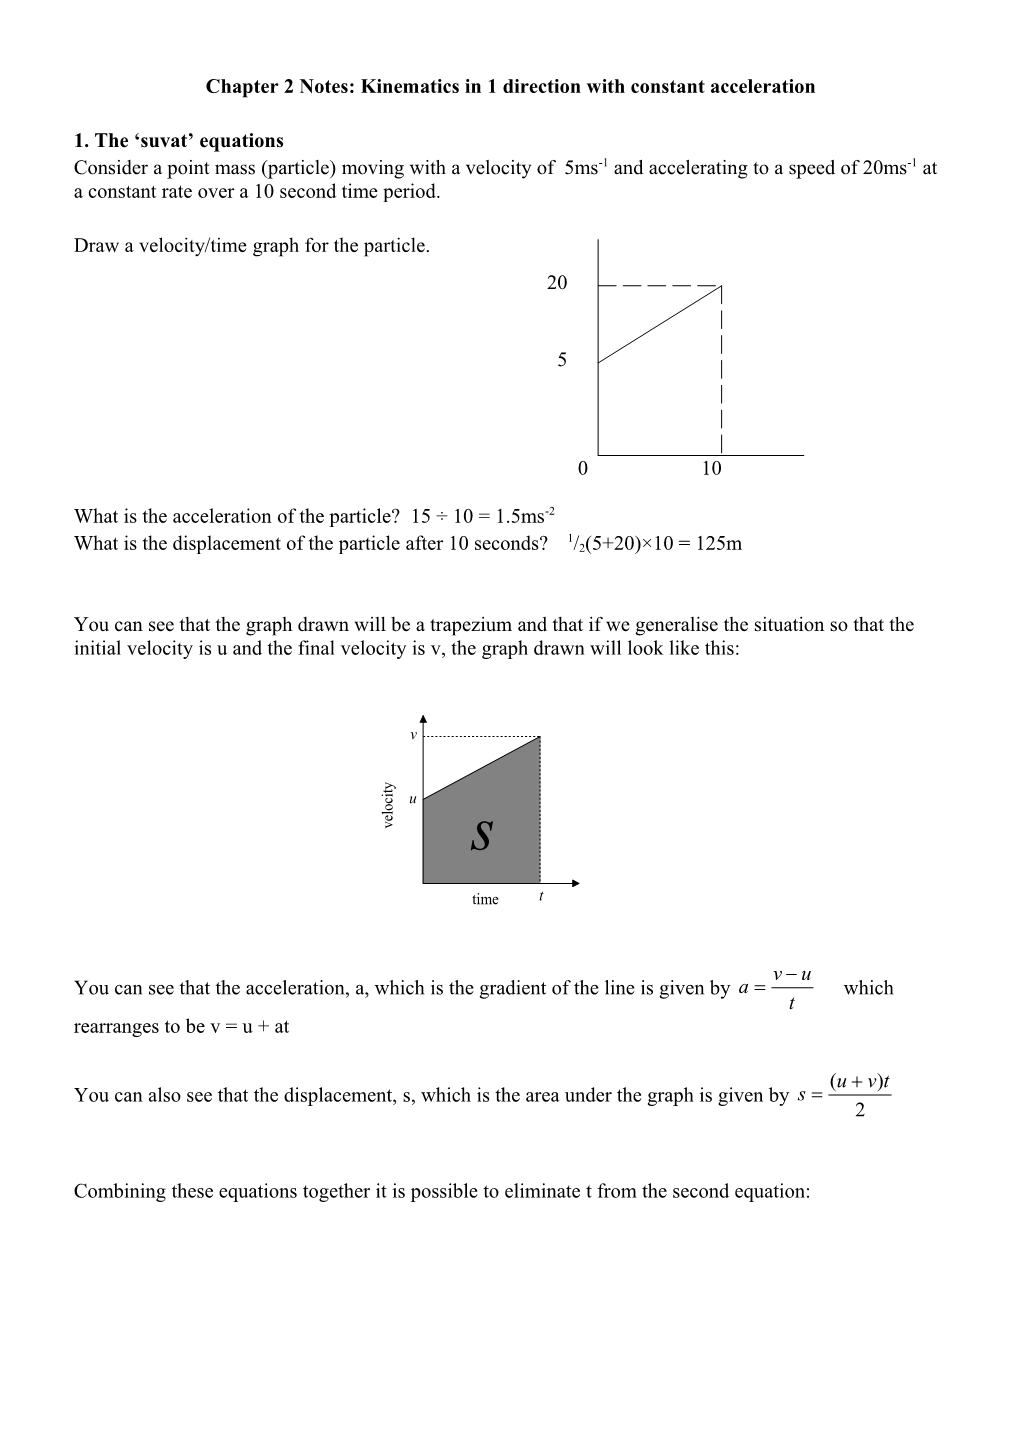 Chapter 2 Notes: Kinematics in 1 Direction with Constant Acceleration